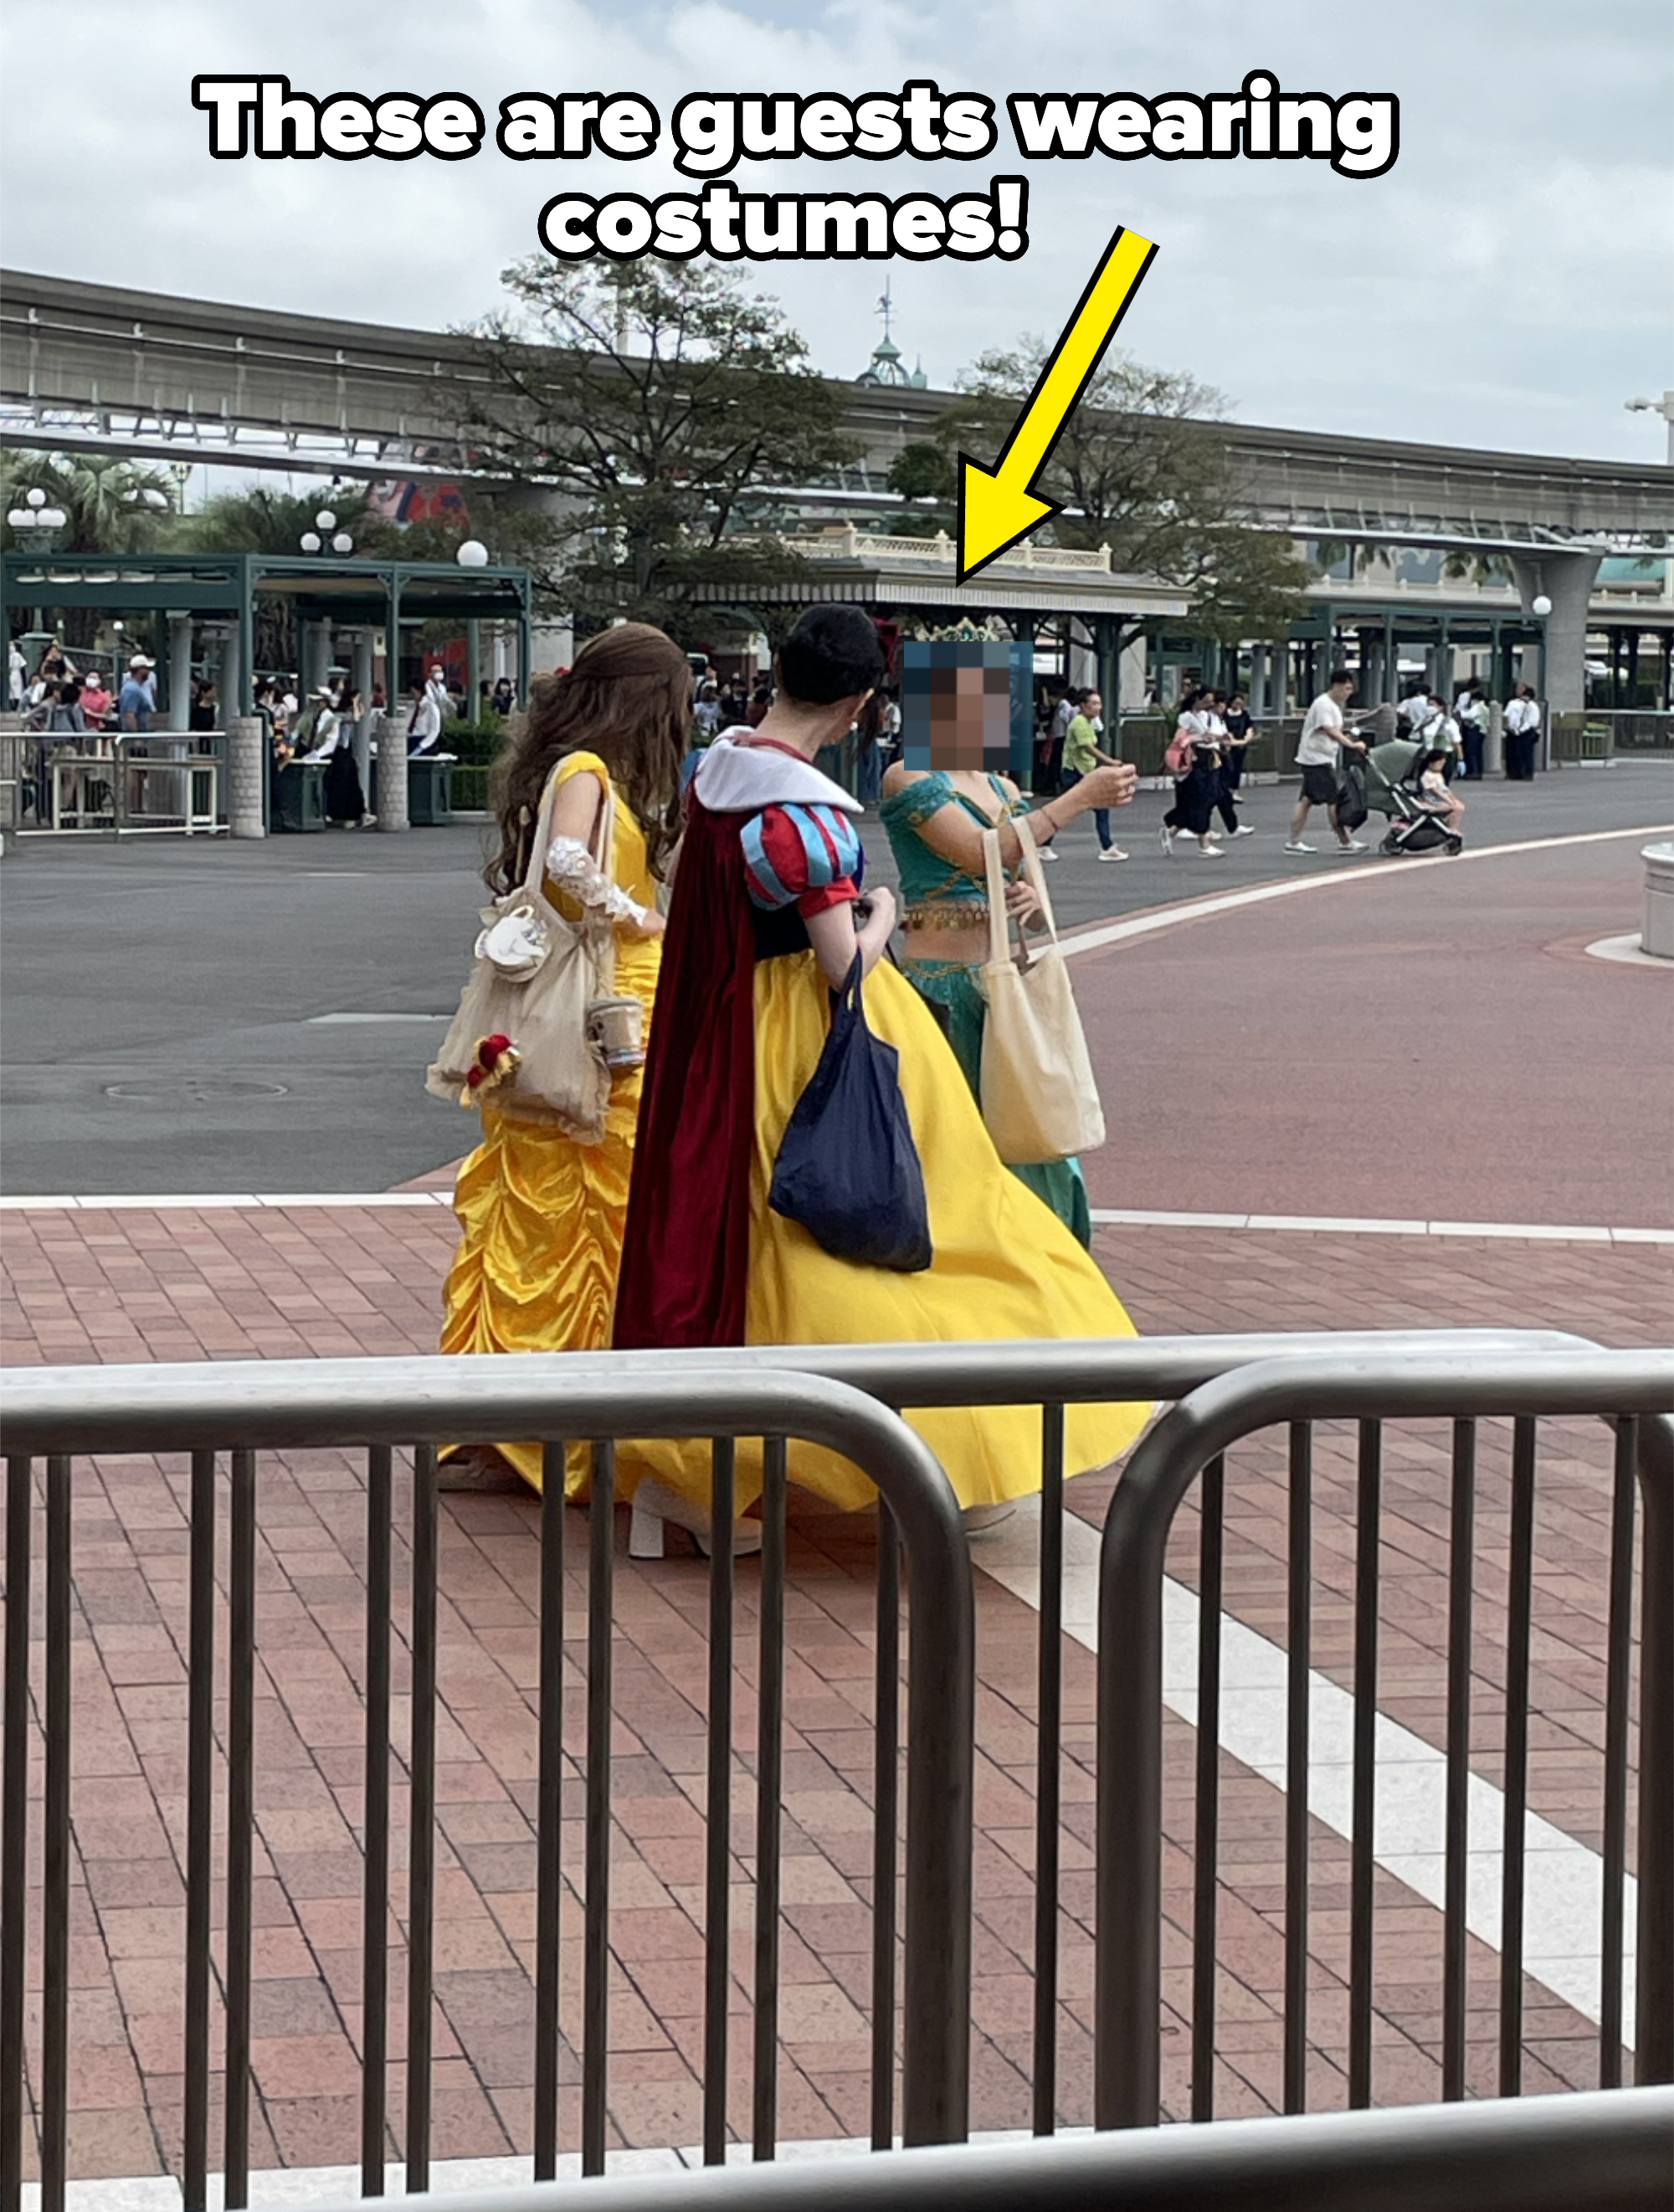 Three women dressed as Belle, Snow White, and Jasmine are walking together in an amusement park